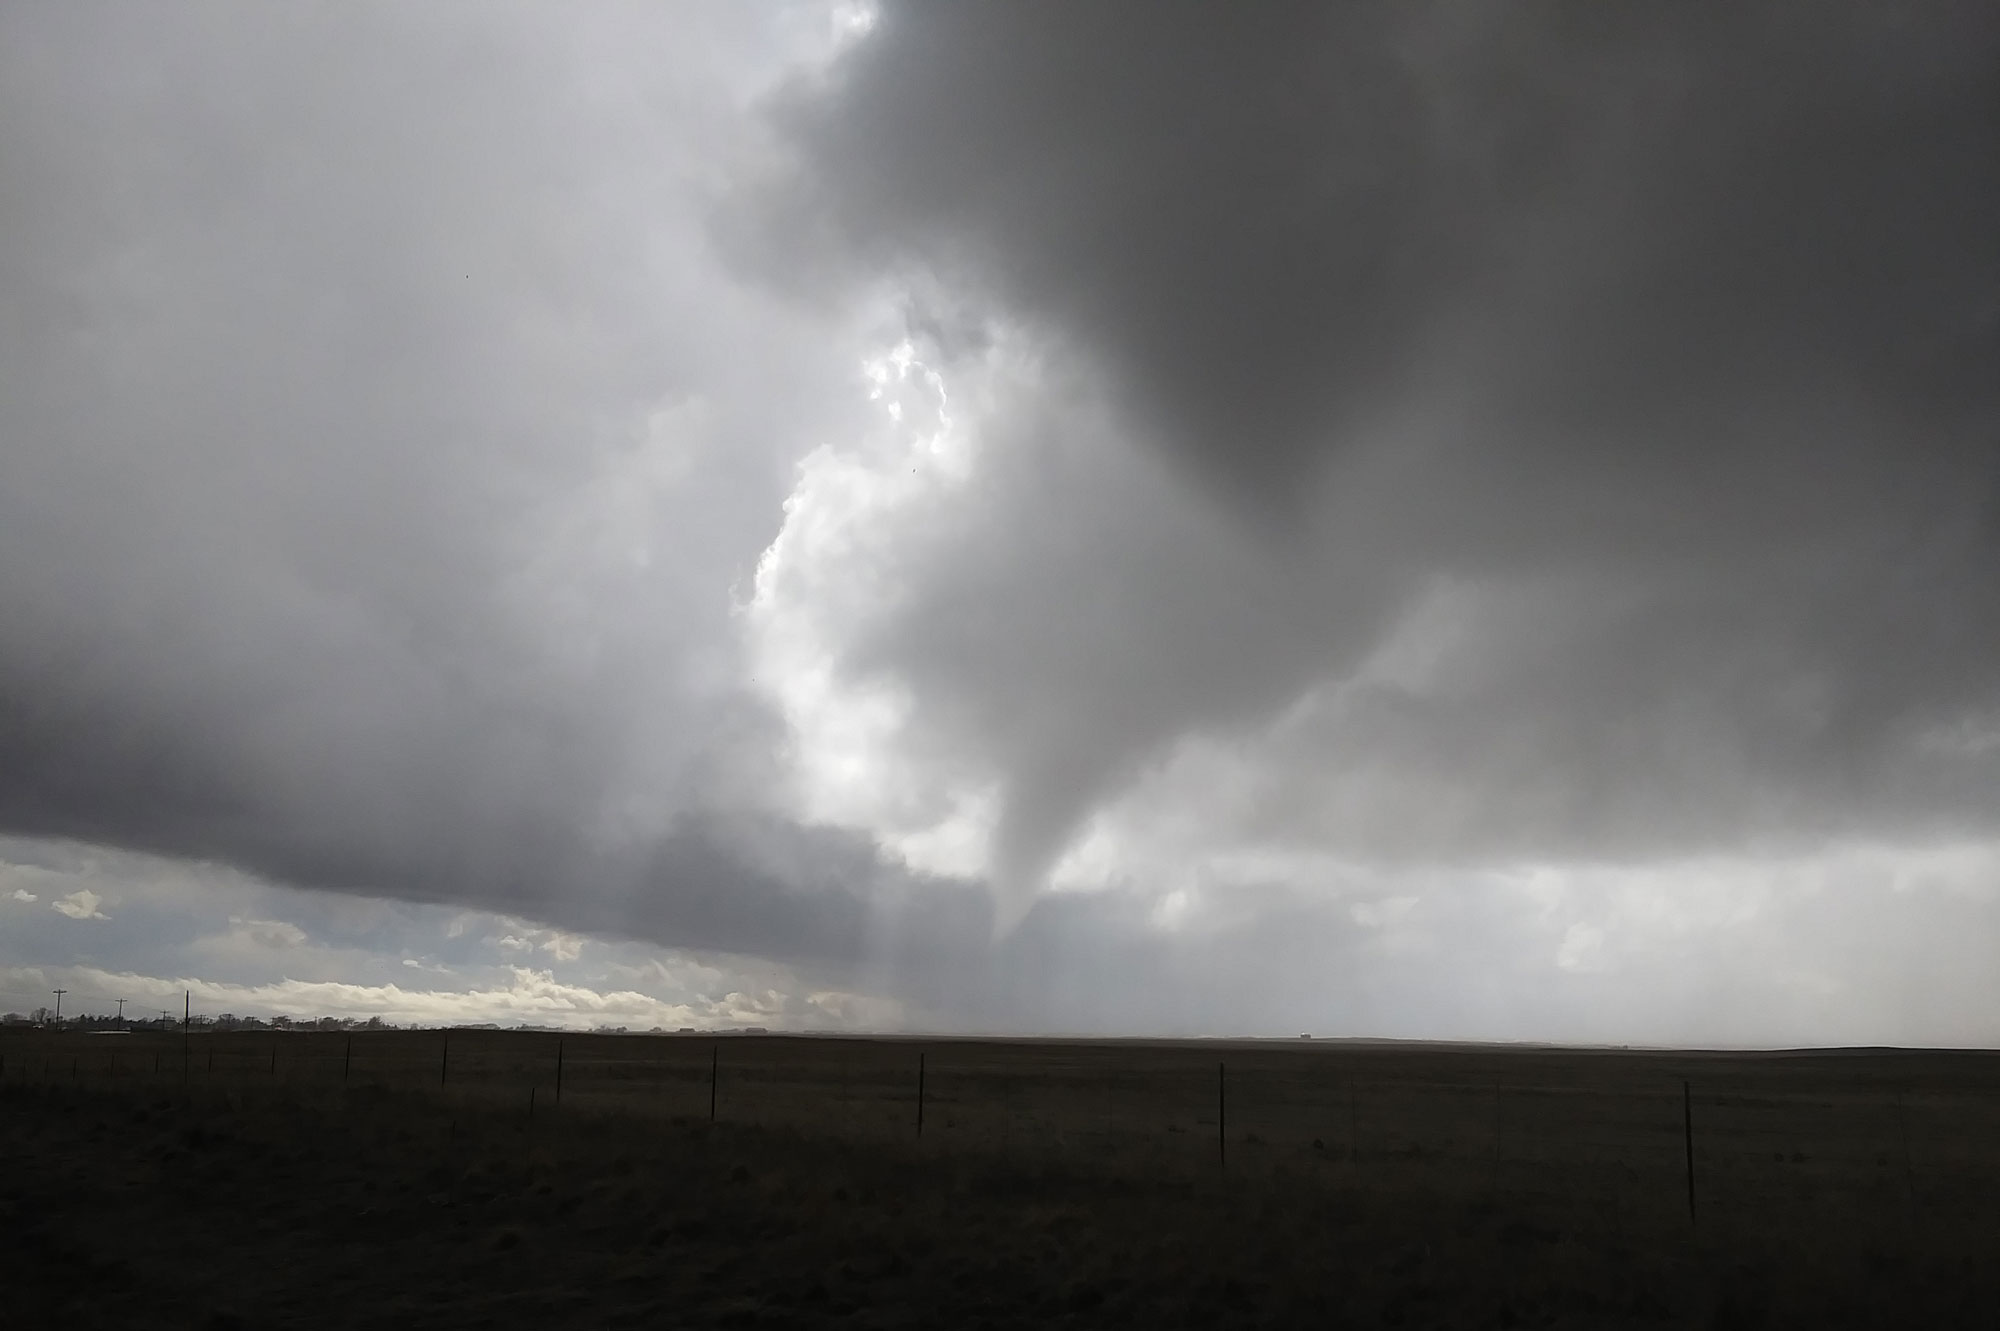 Photograph of a cloudy sky with two funnel clouds (cone-shaped extensions of the clouds) extending towards the ground. On the ground, the landscape is so dark it is nearly black.